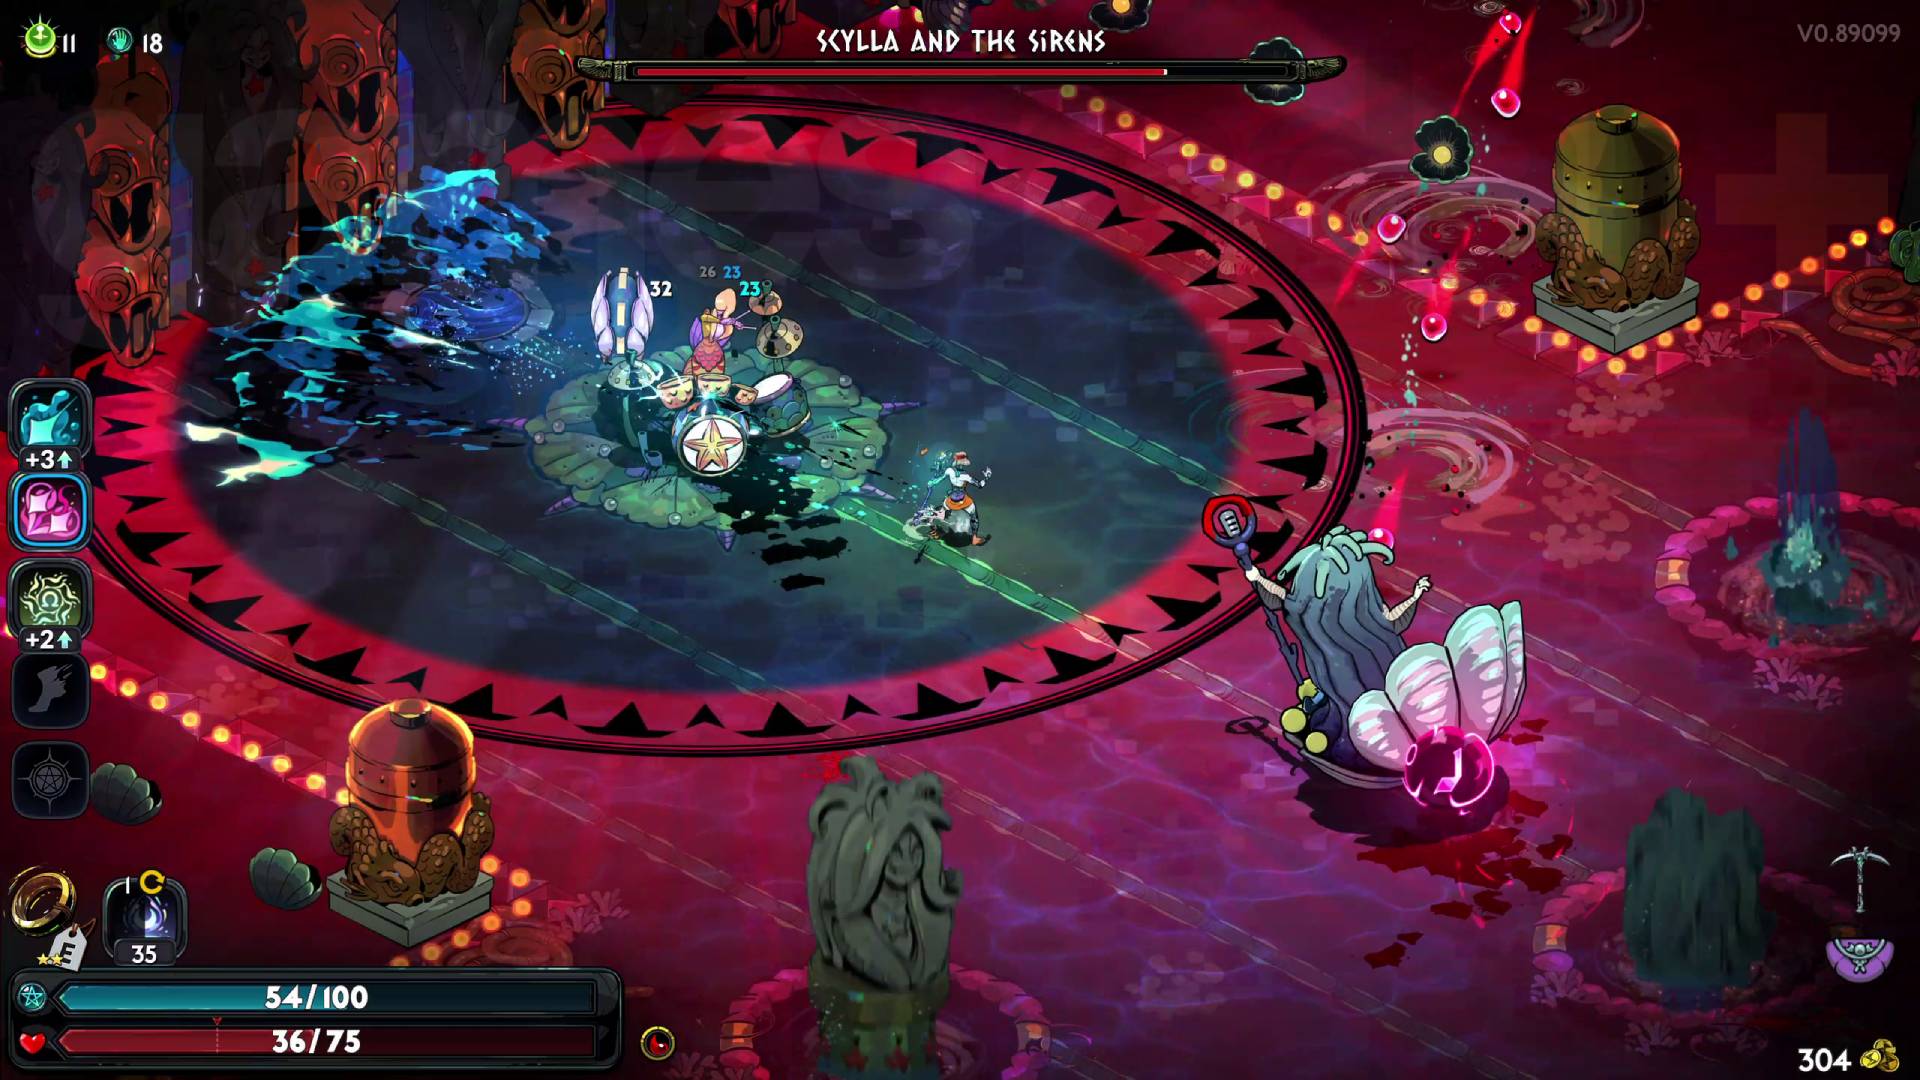 Hades 2 Scylla and the Sirens boss fight drum attack